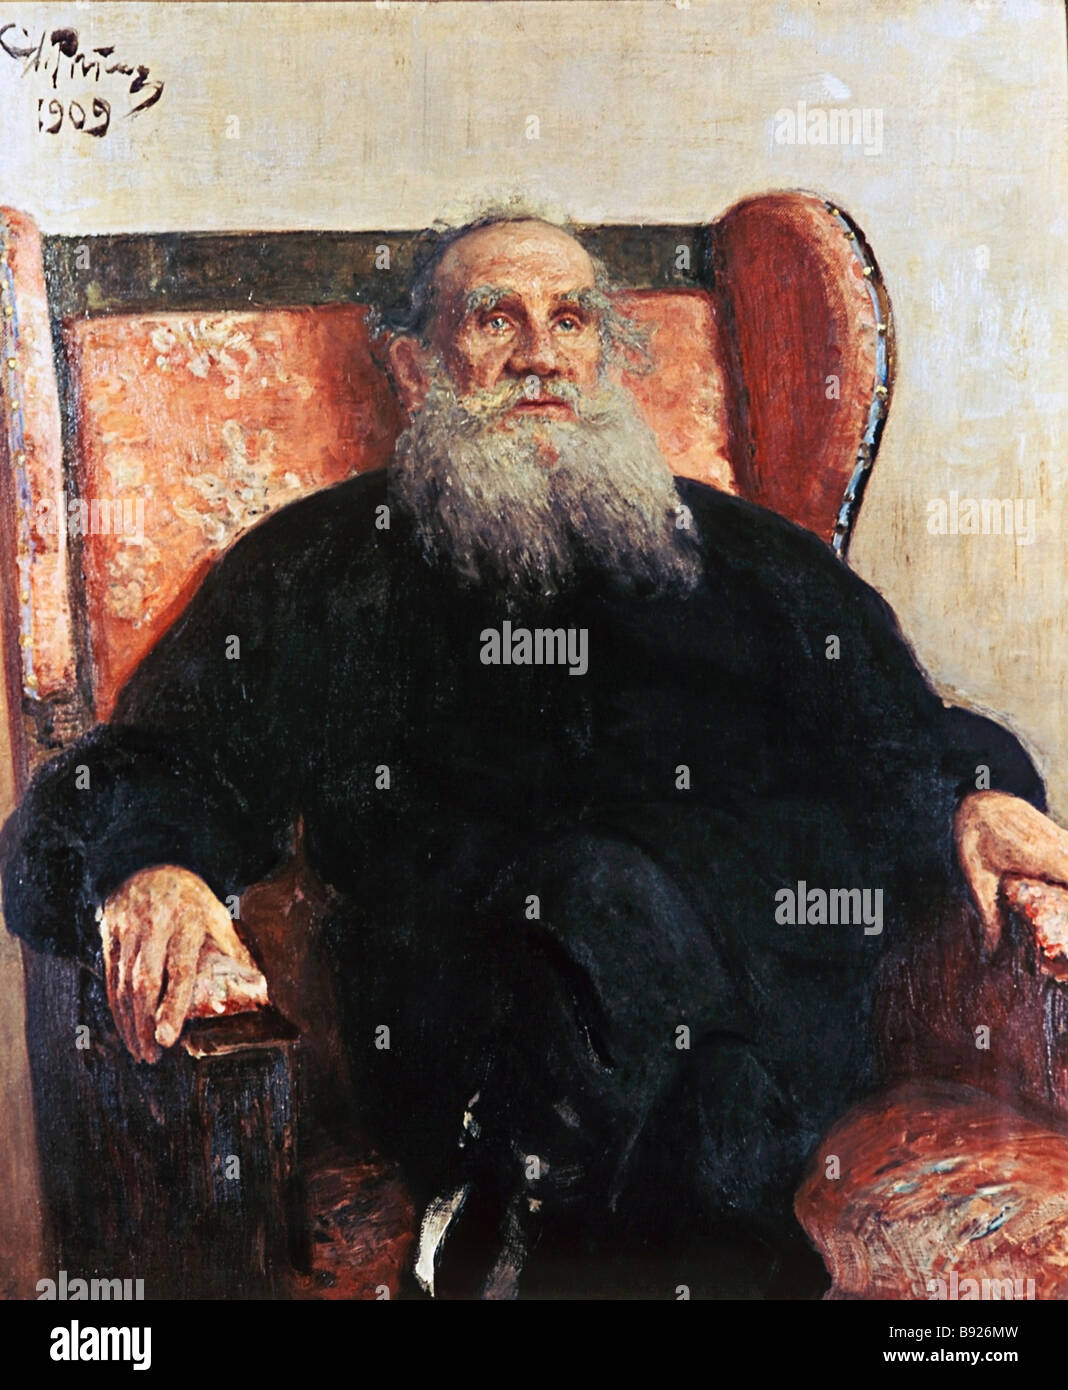 Leo Tolstoy in a Pink Chair Ilya Repin 1844 1930 Oil on canvas 1909 The ...